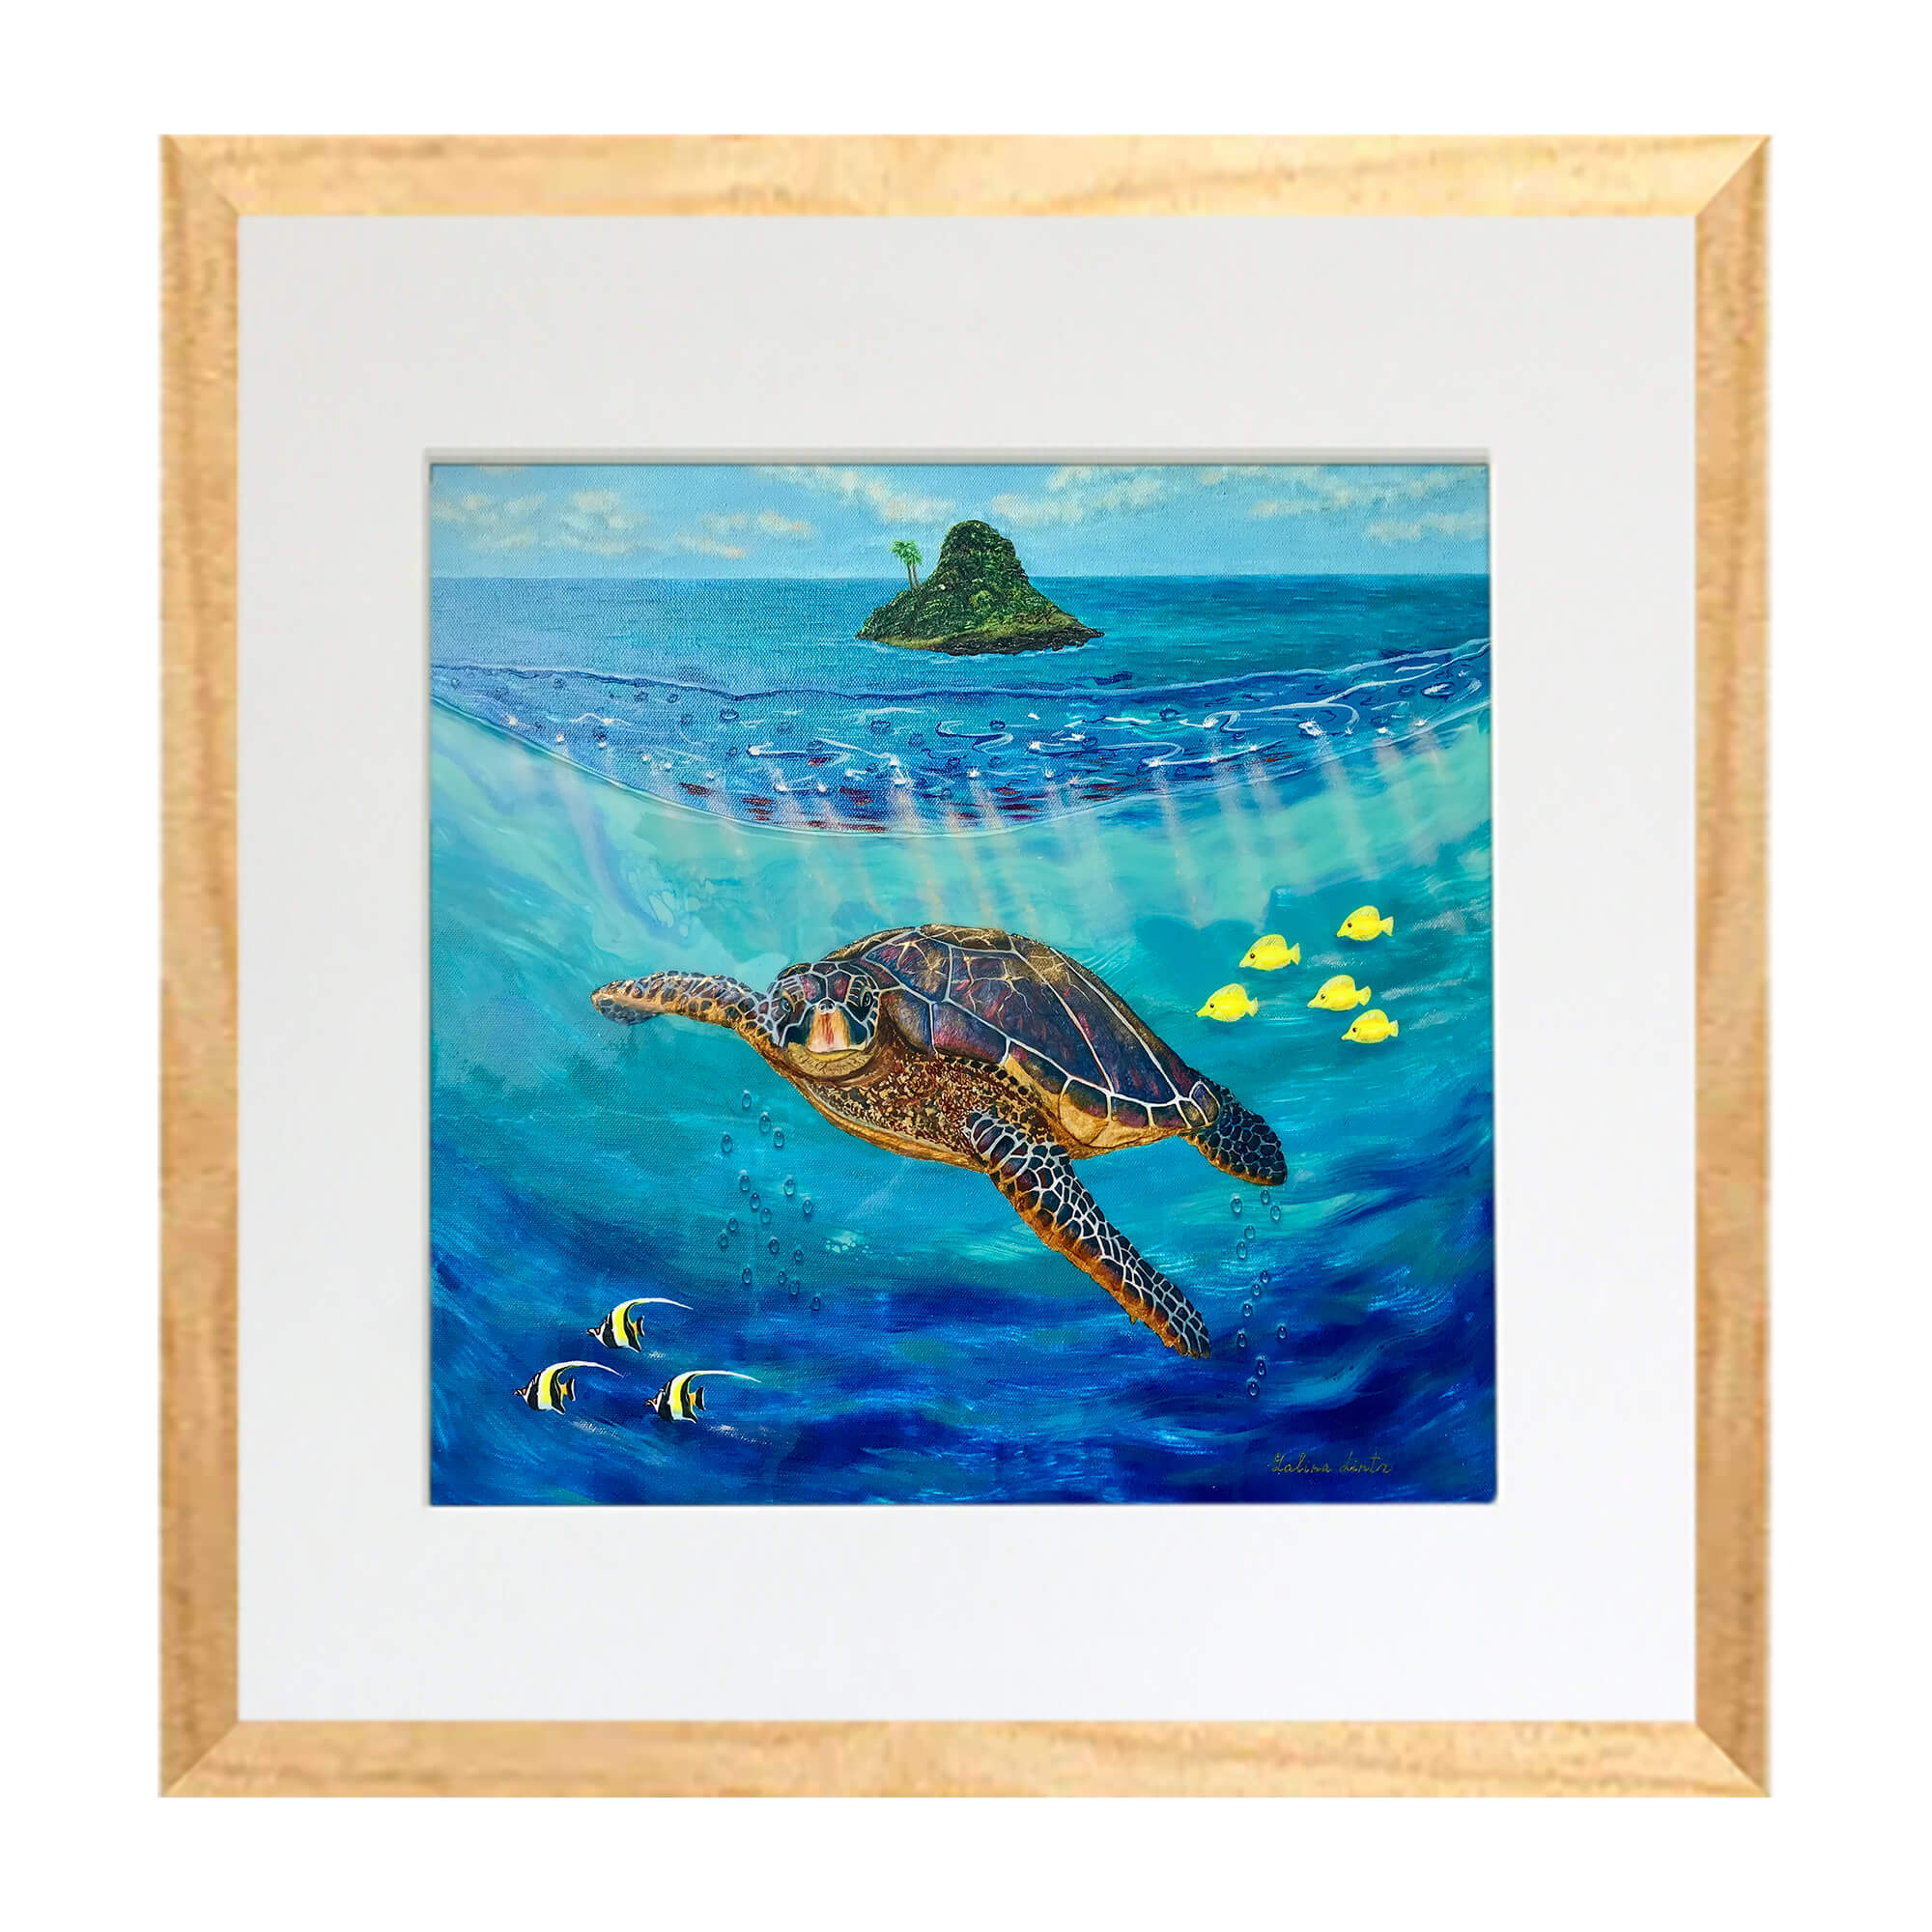 Matted art print with wood frame showcasing different types of fishes underwater by hawaii artist  Galina Lintz